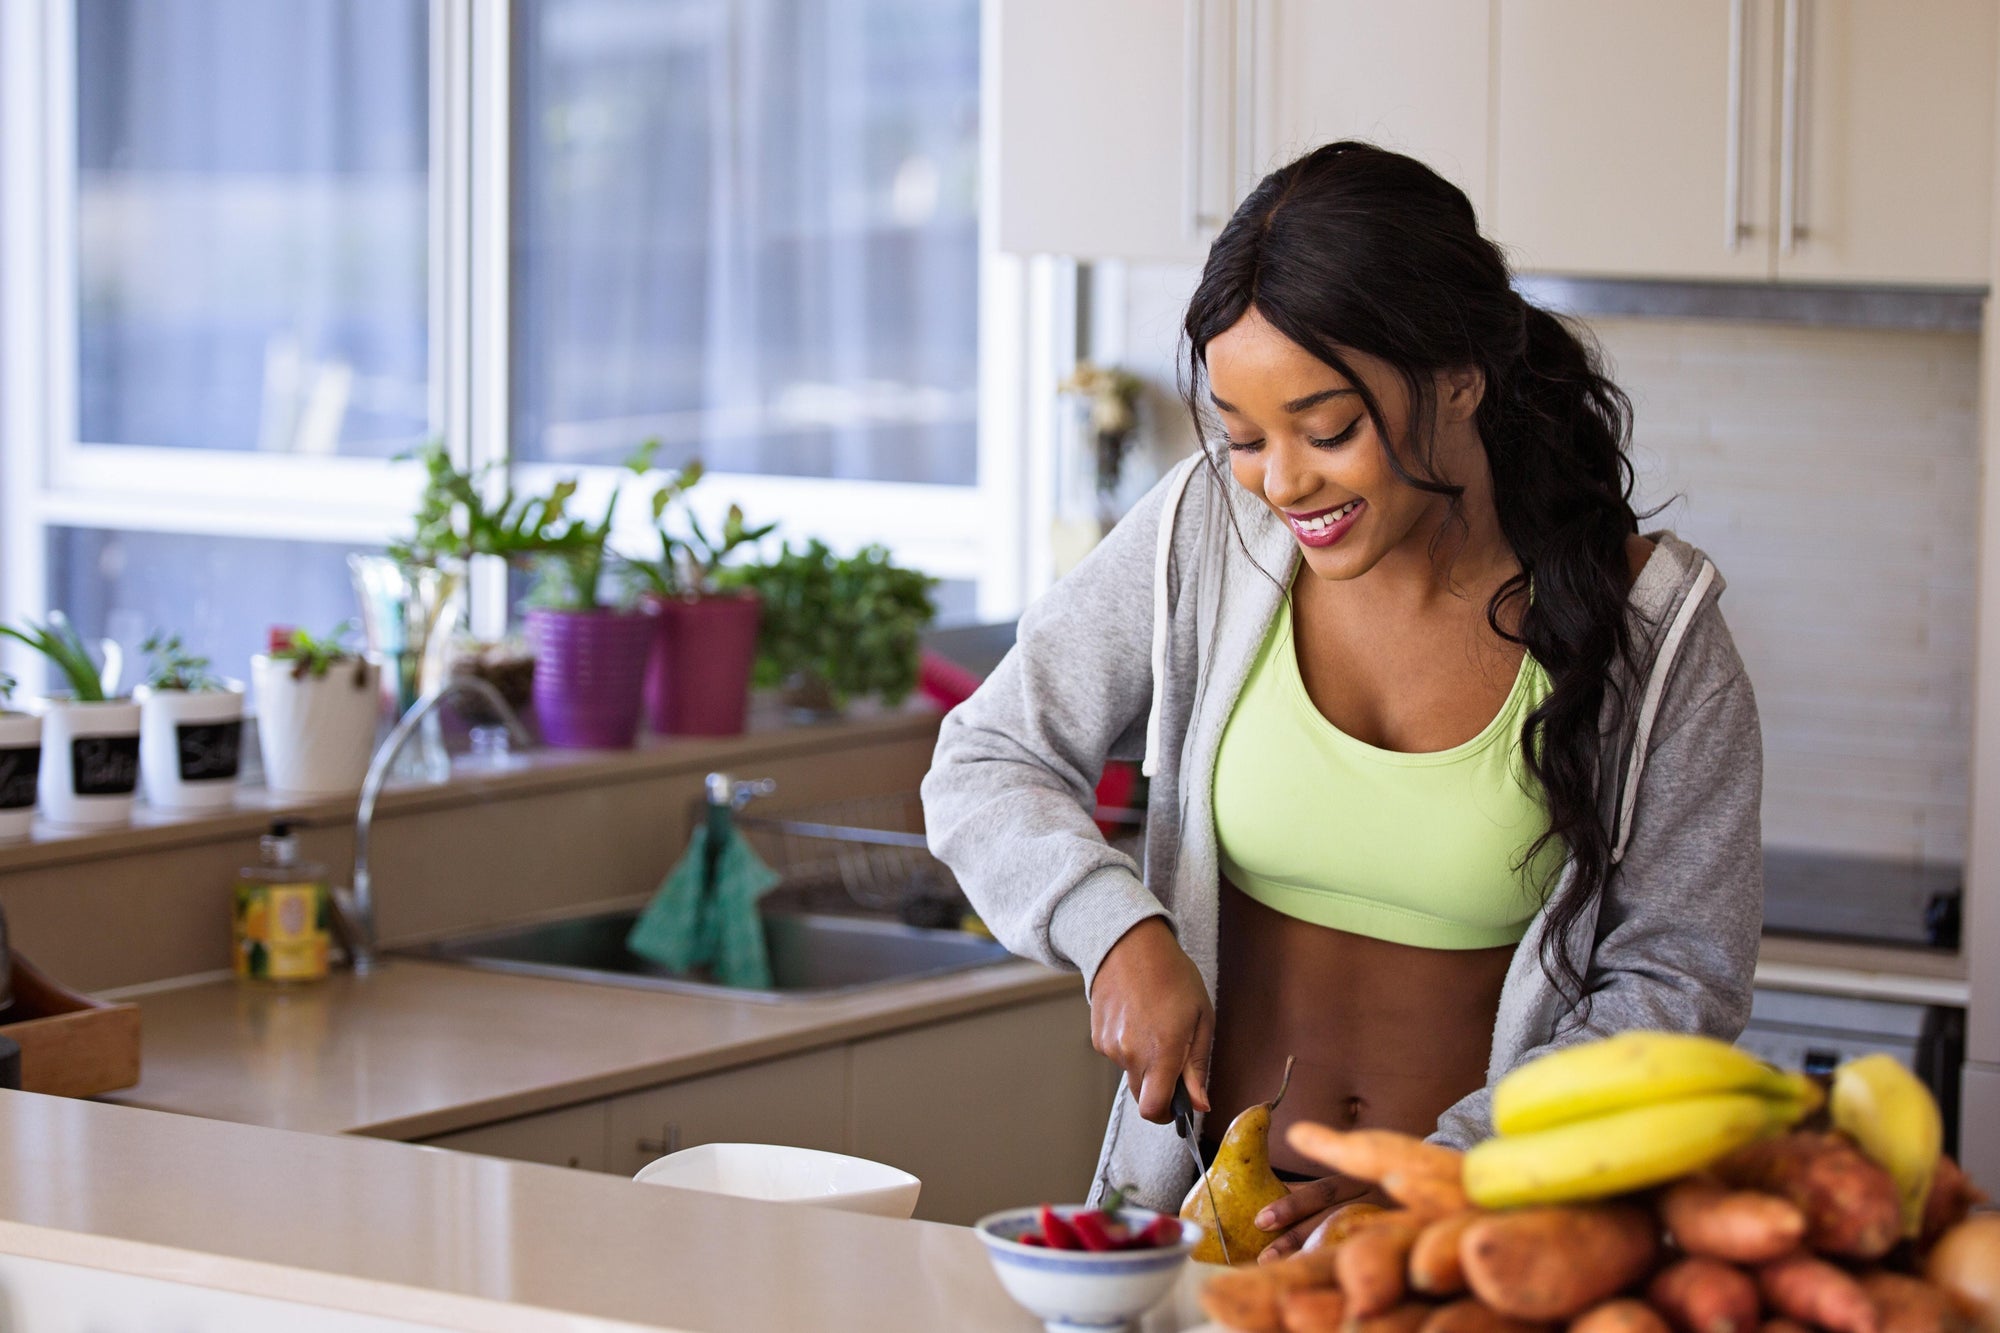 5 Unexpected Ways to Live a Healthier Lifestyle